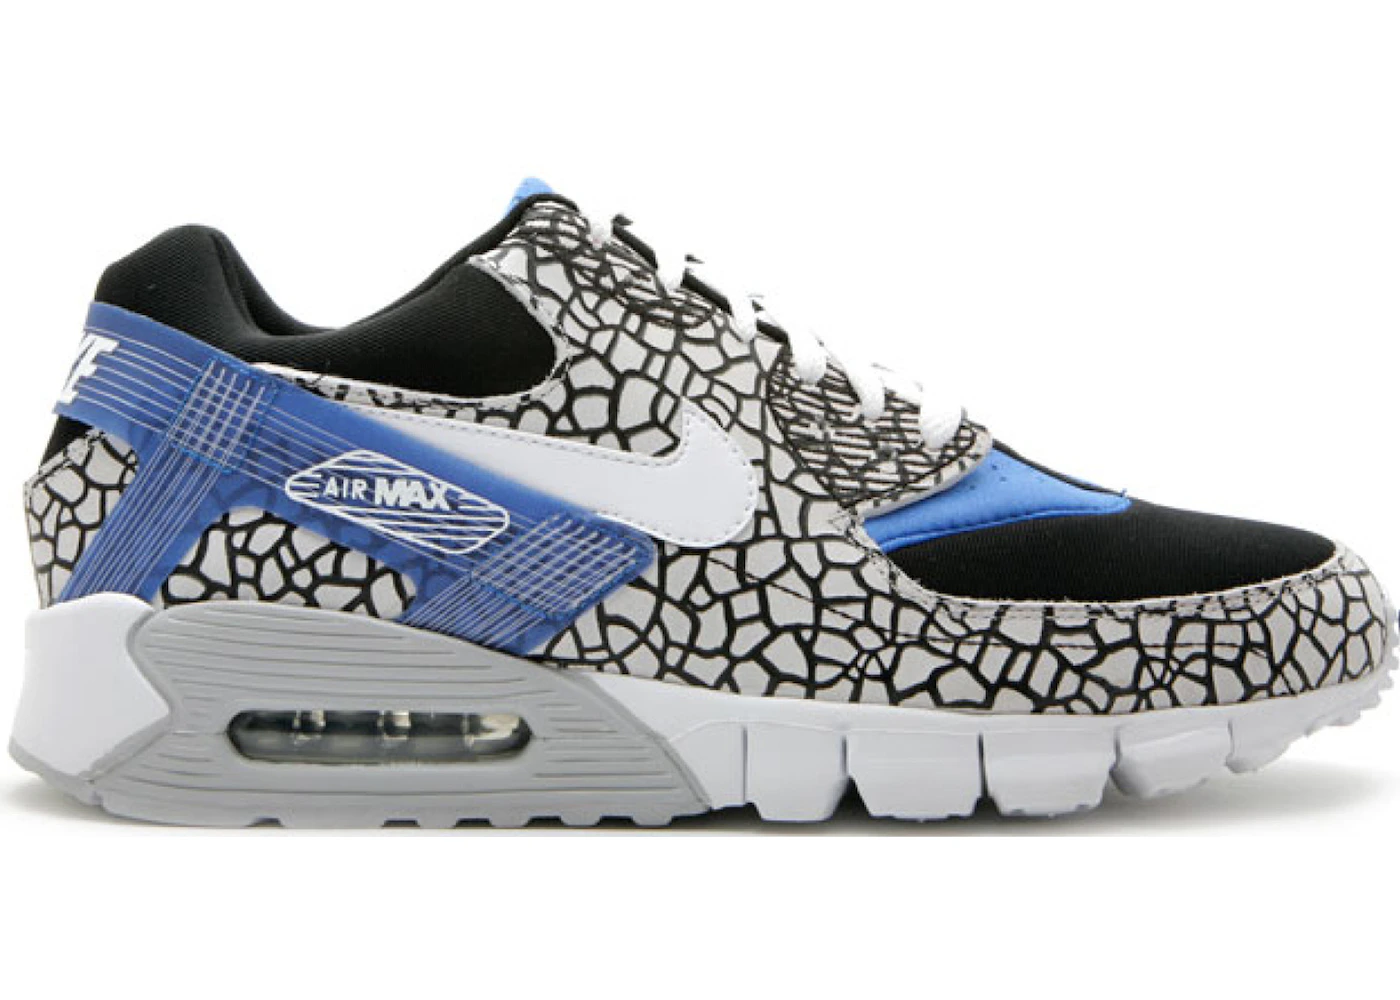 Nike Air Max 90 Current Hufquake Men's - 375576-011 - US